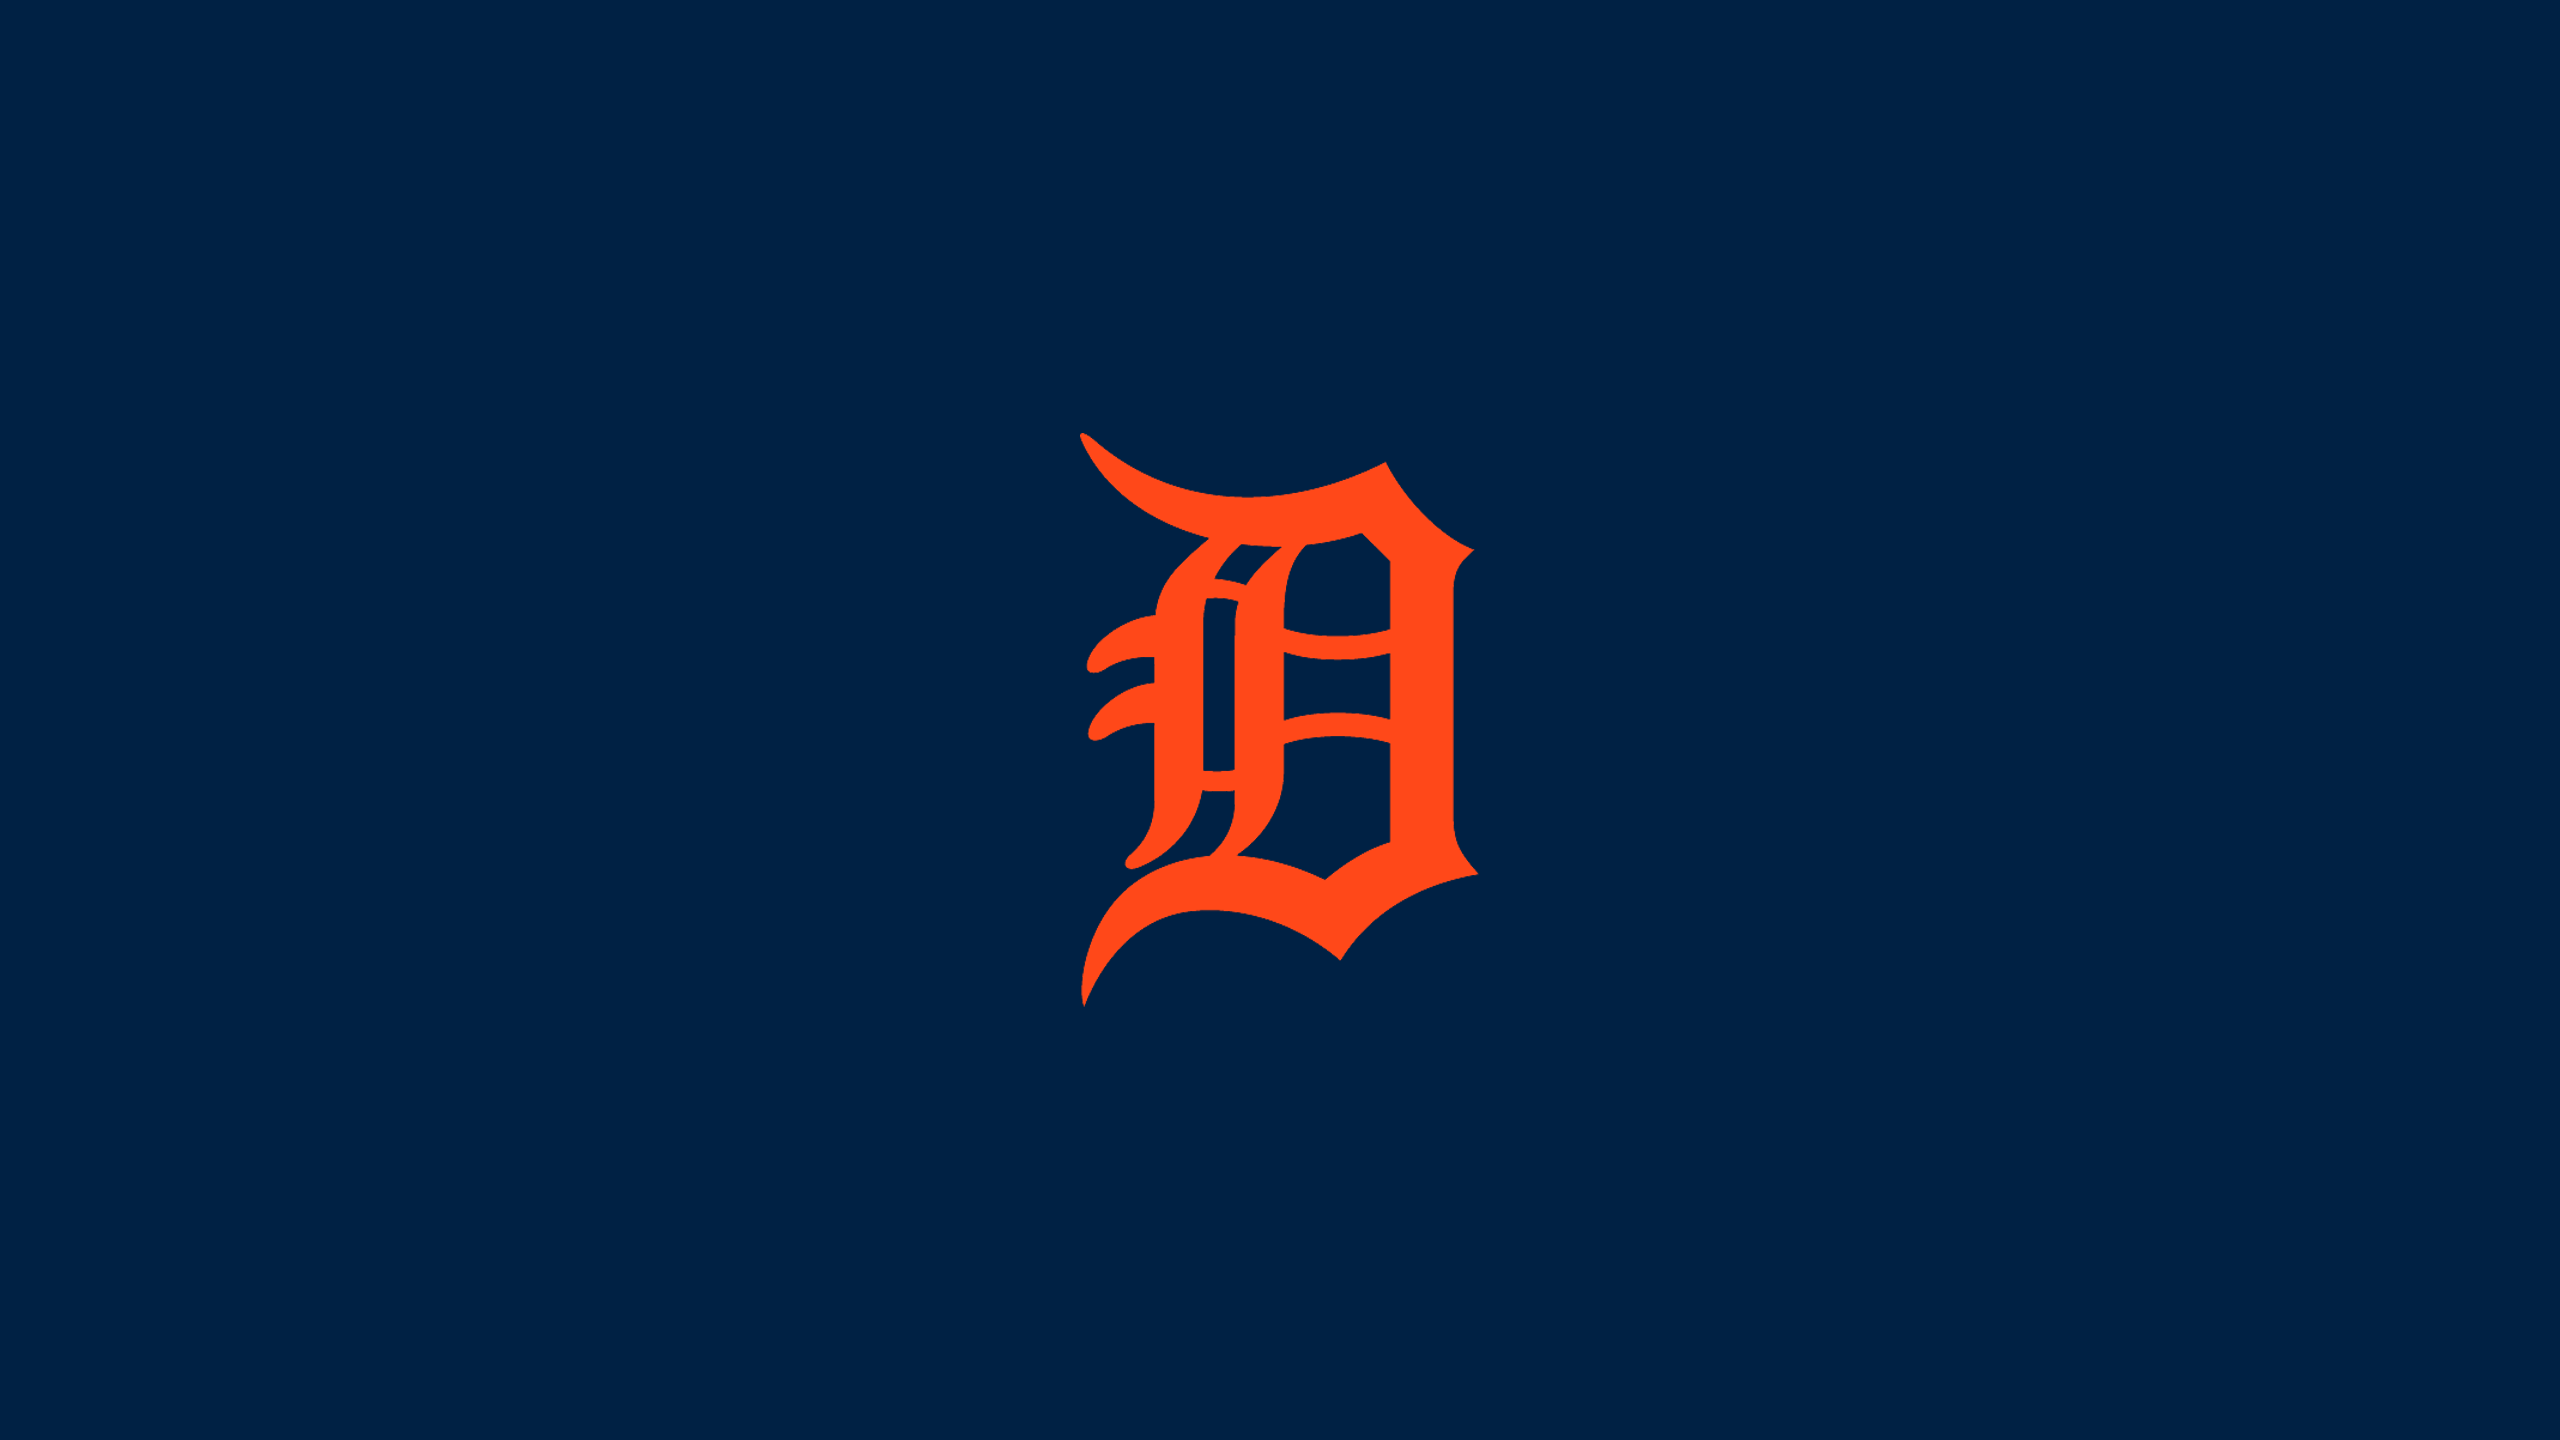 Detroit Tigers - MLB - Square Bettor